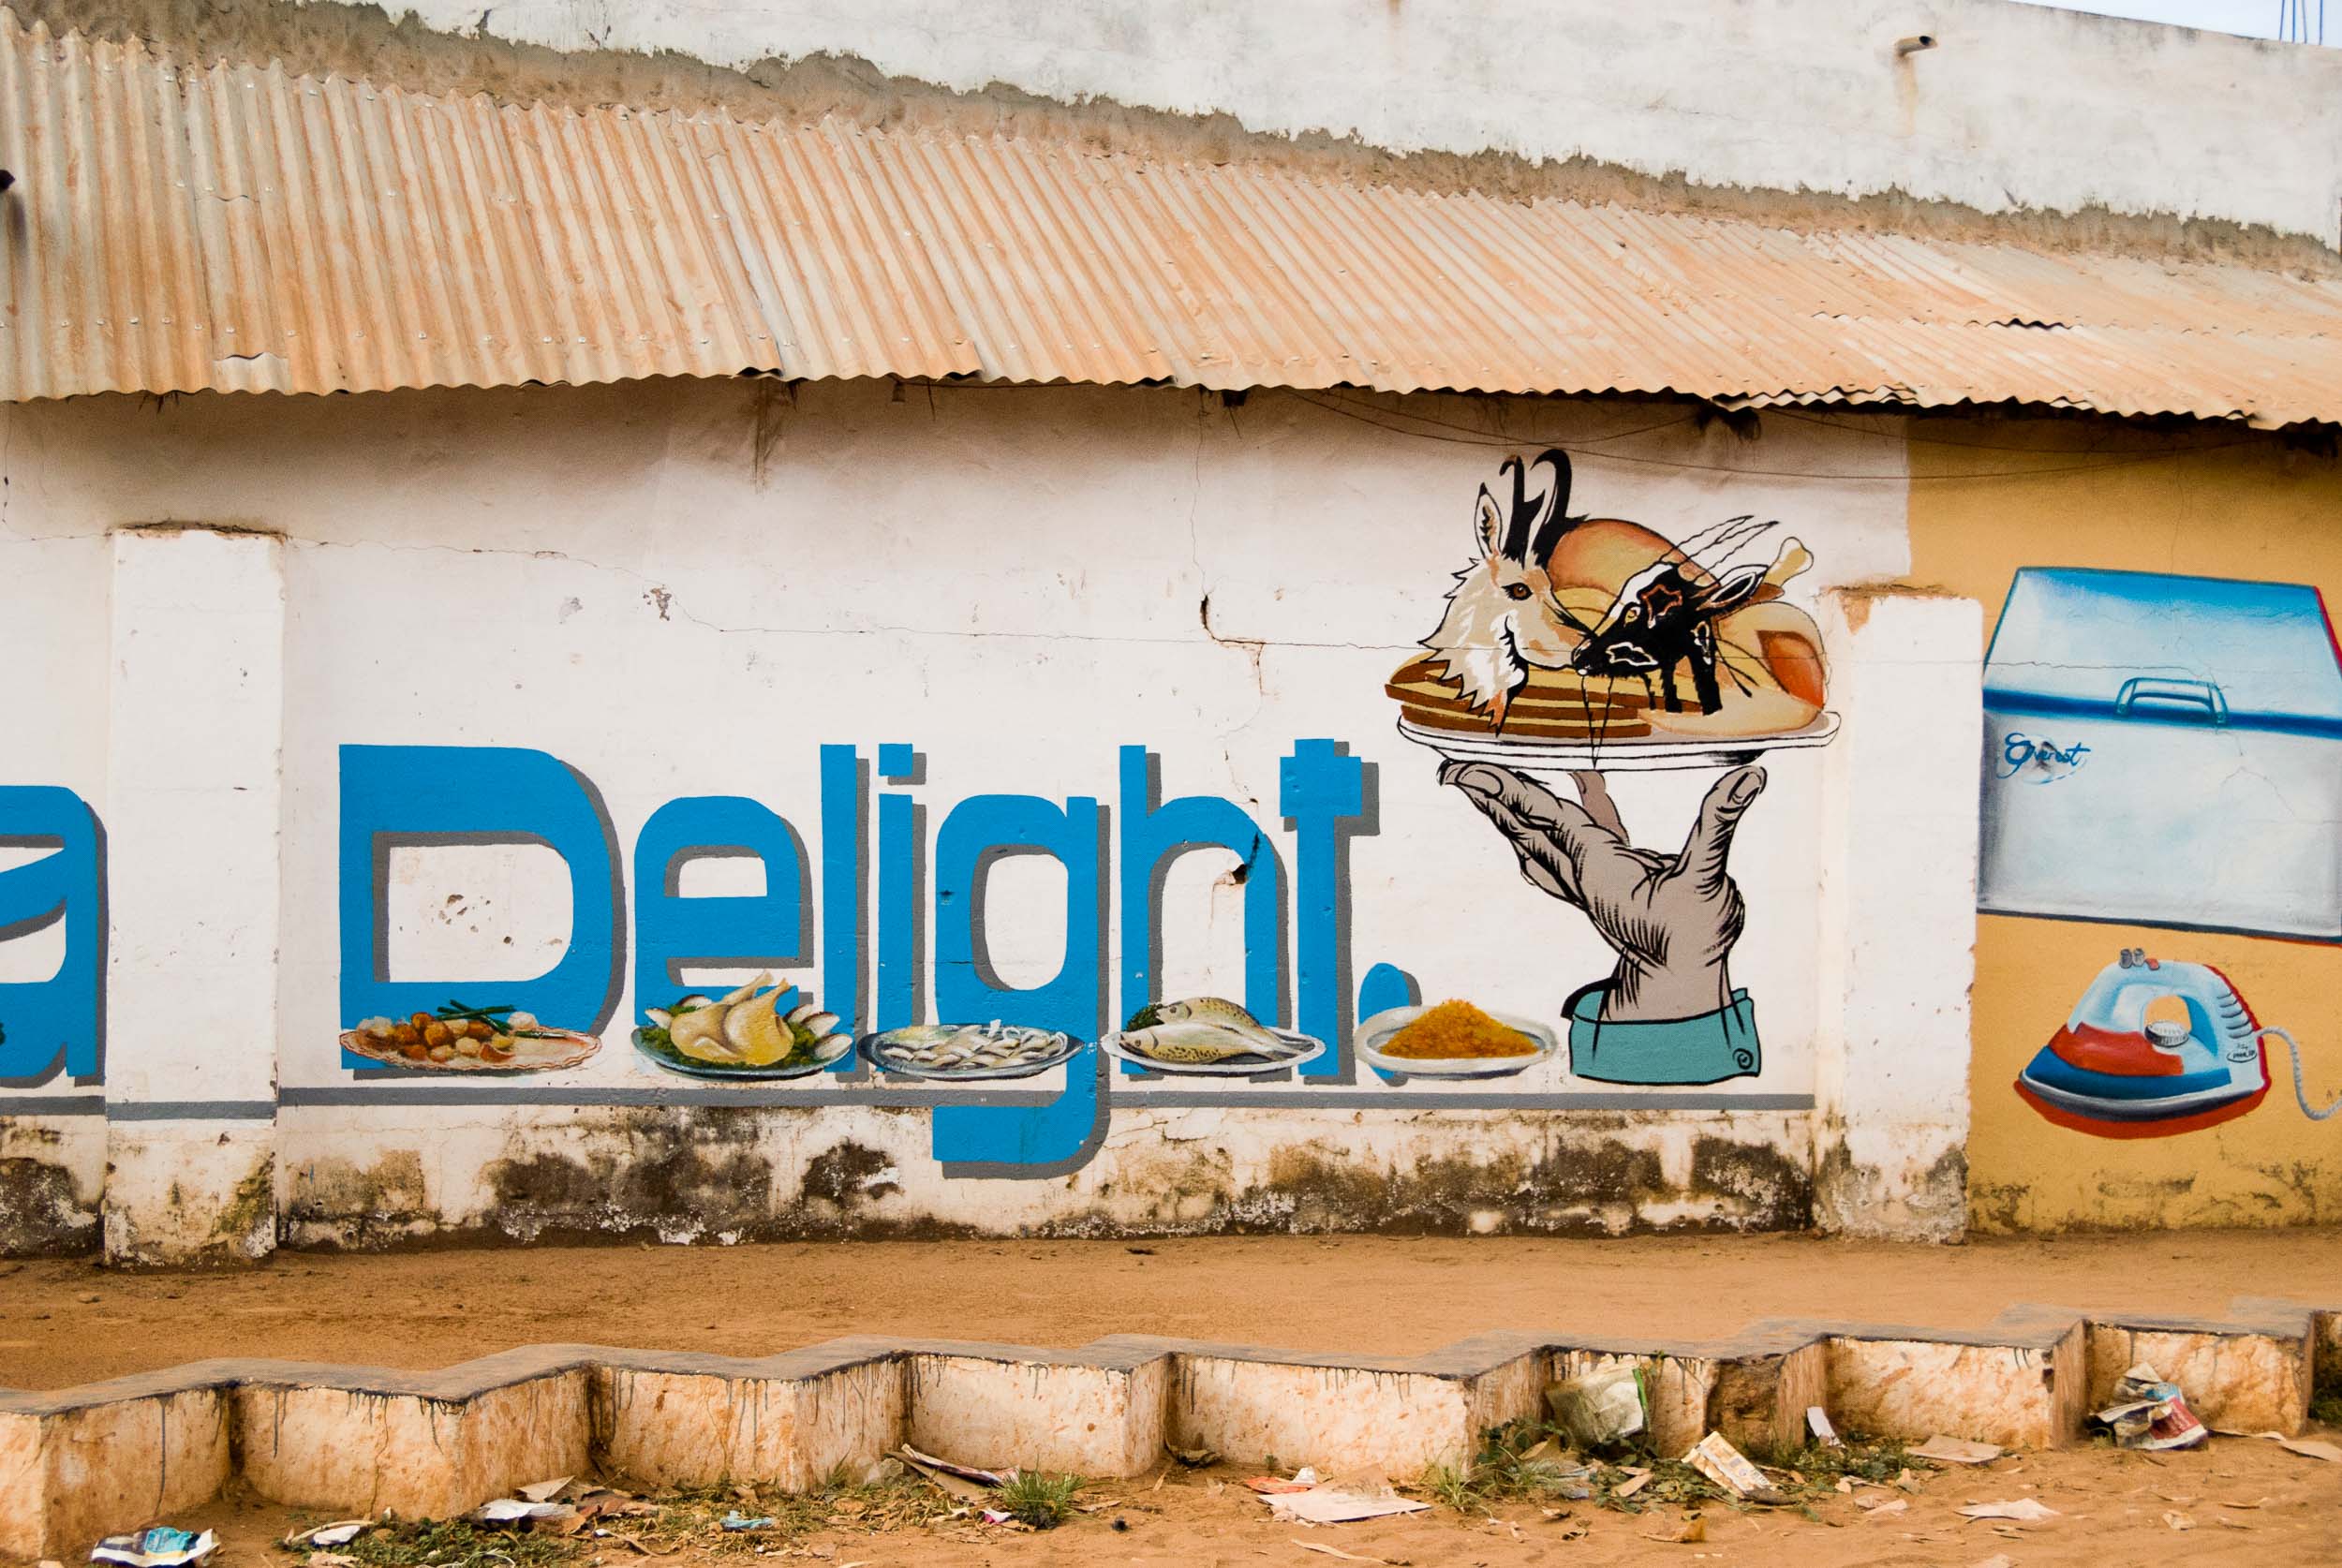  Colorful Advertisement, Wallpainting, Gambia, Africa 